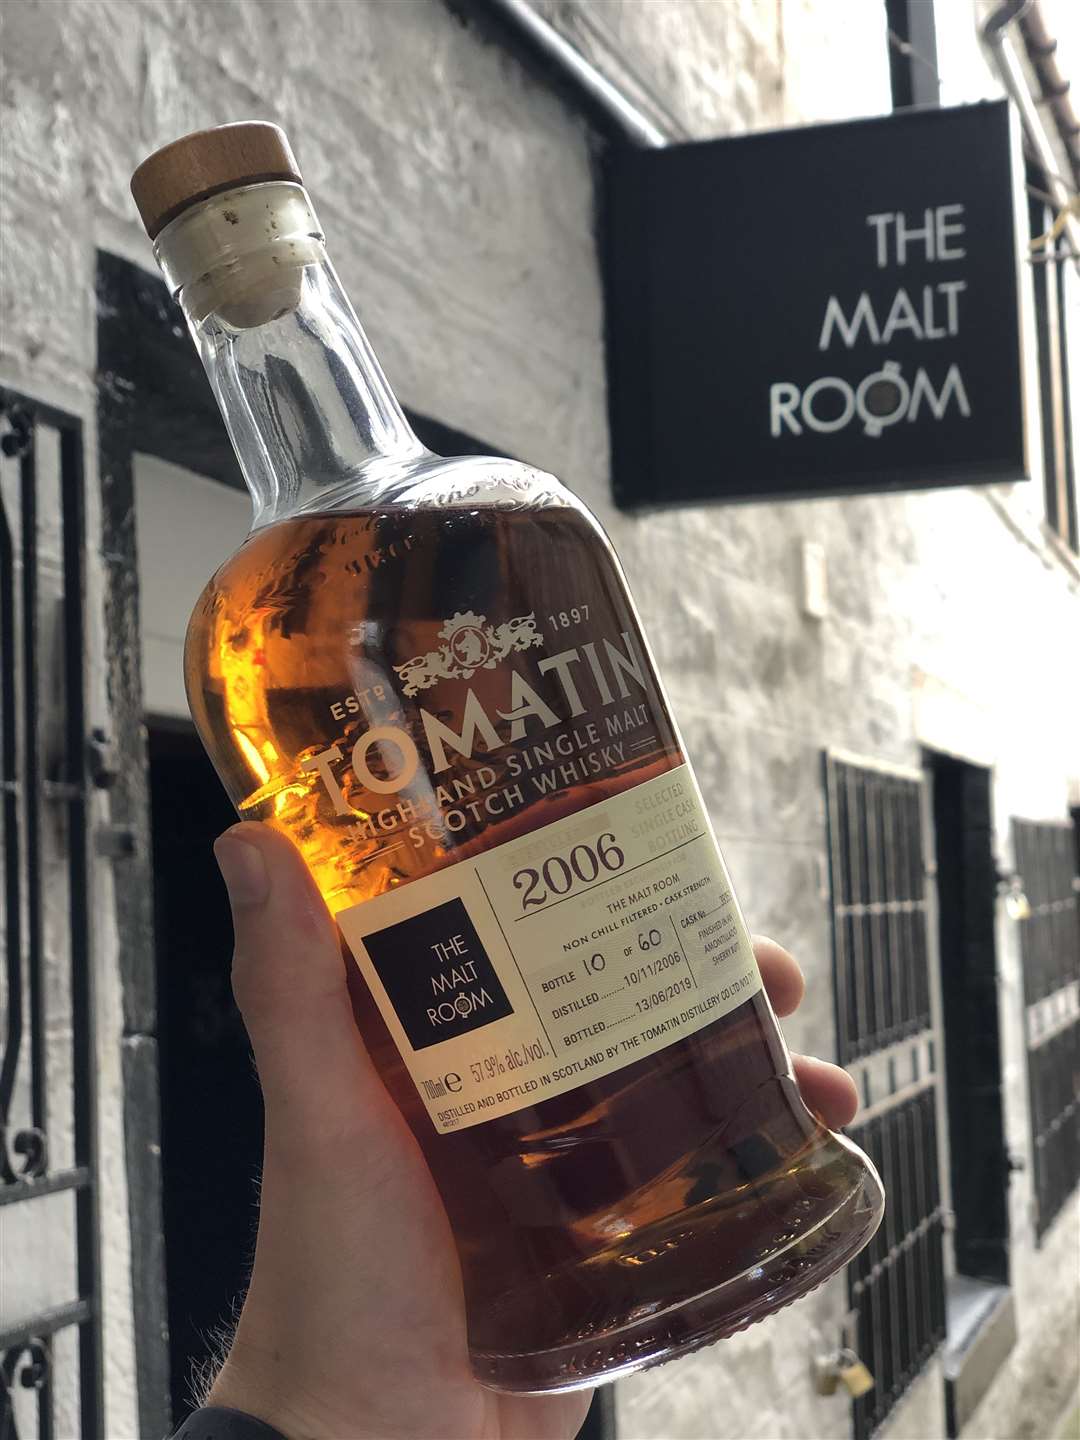 The Malt Room now has its very own whisky on the shelves.